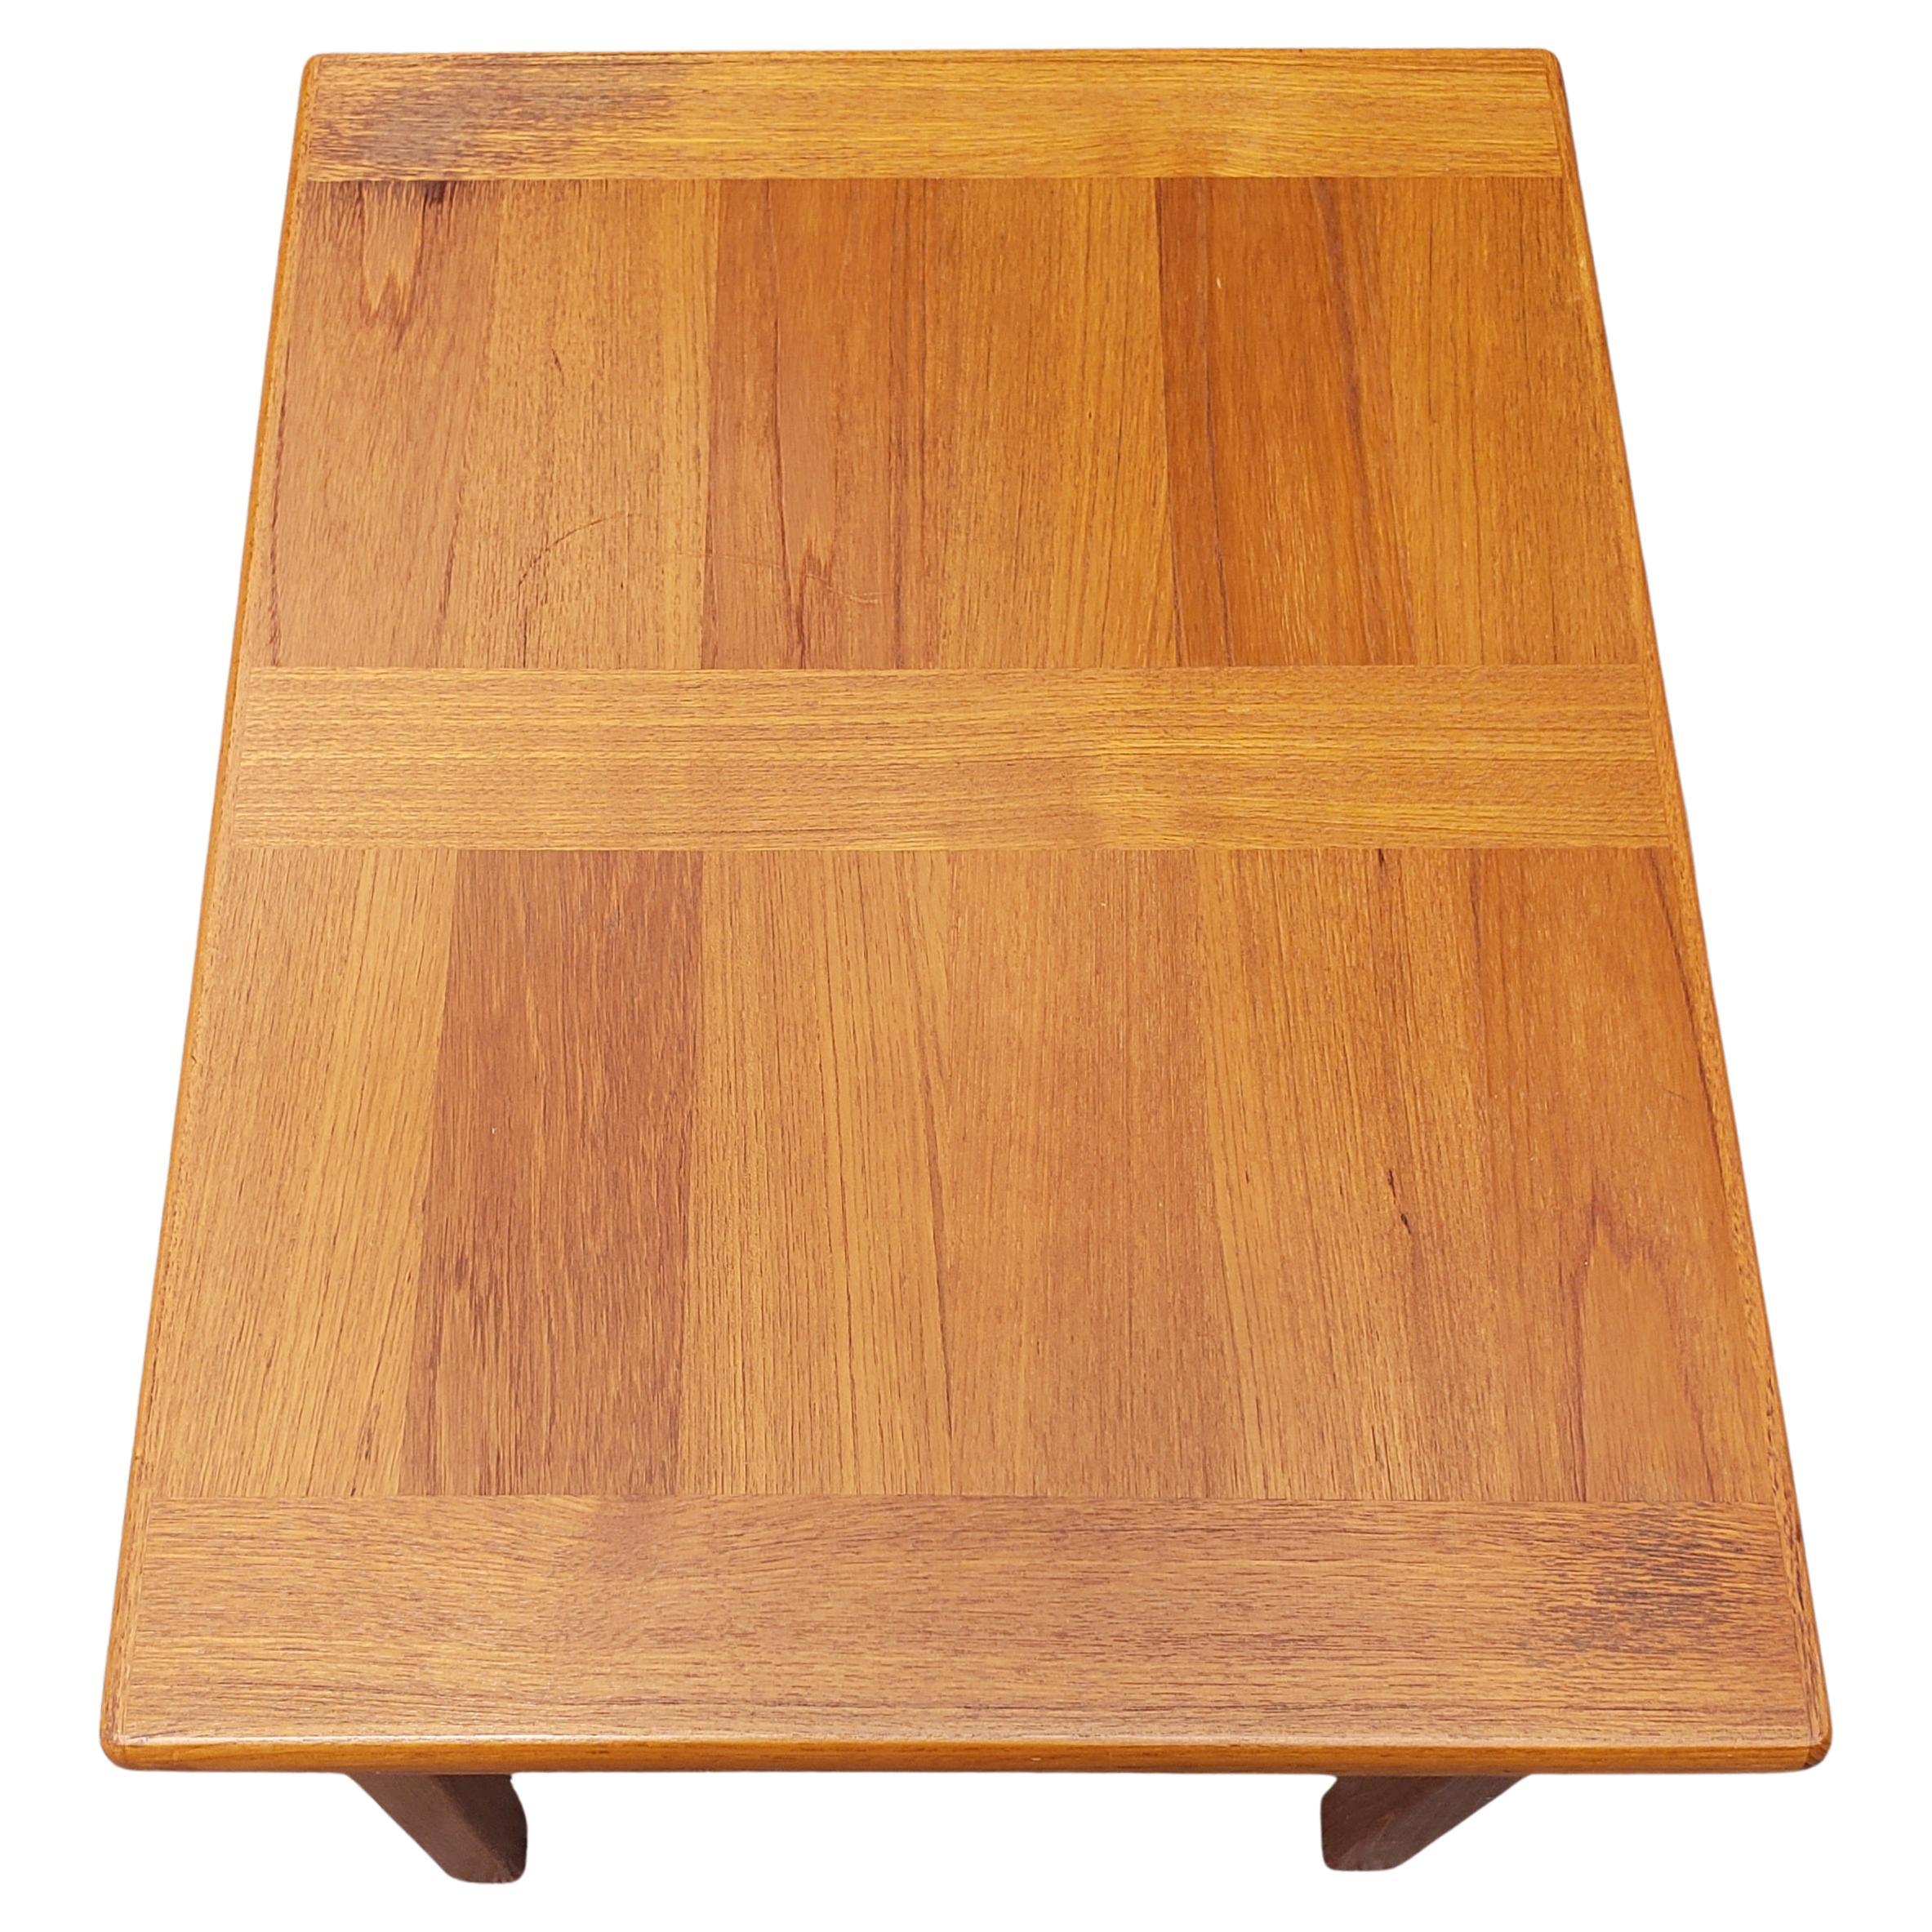 Danish Modern side table 
Manufactured by ABJ Denmark
The table has a rectangle measure that could fits in the corner between the Sofas or else.
Measures 22